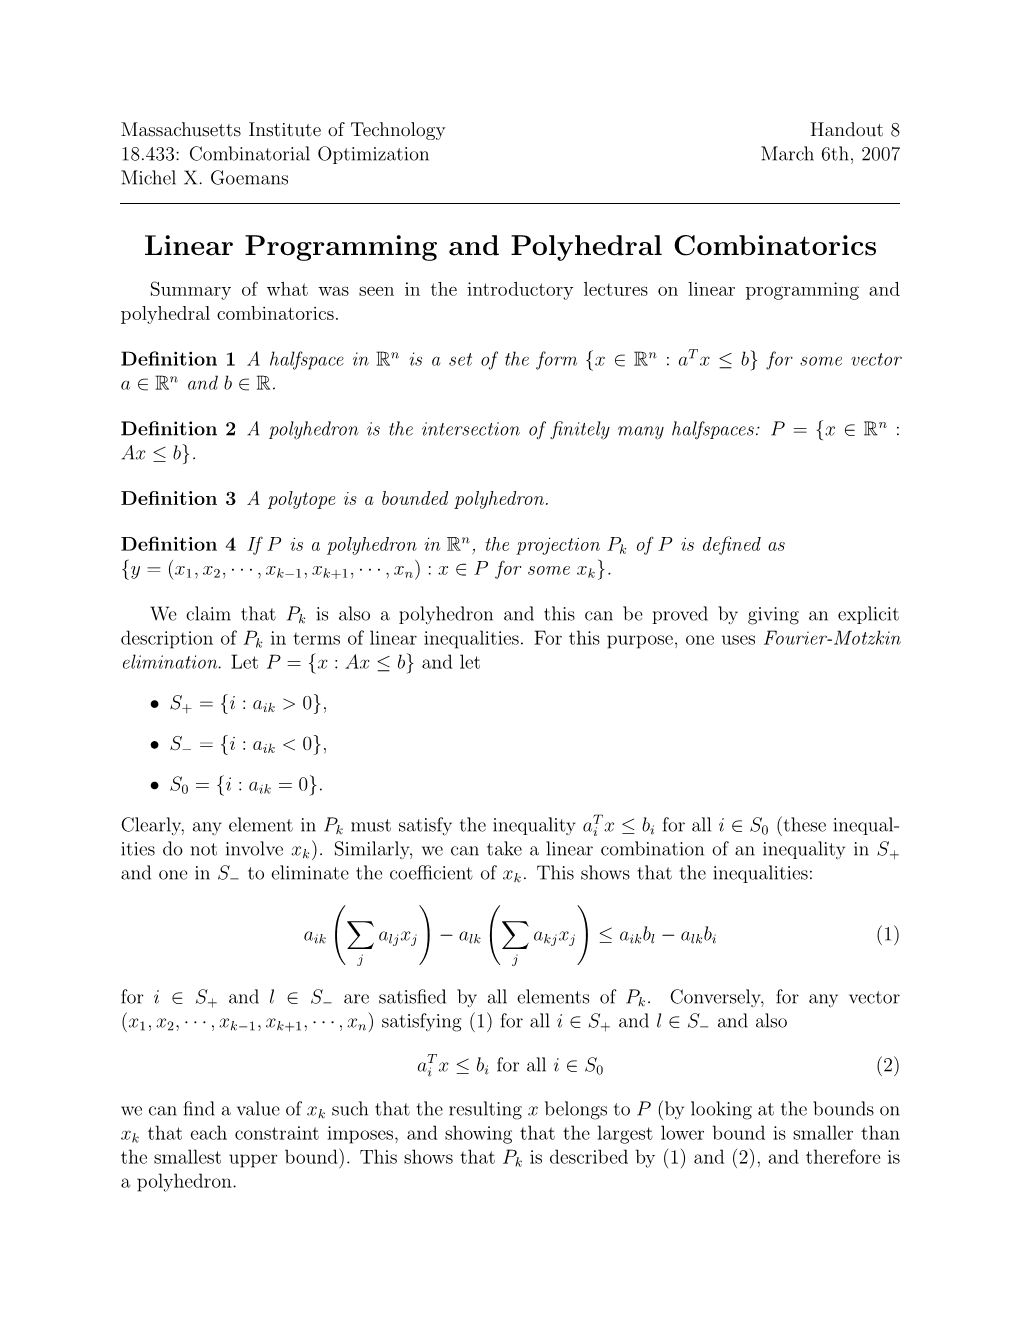 Linear Programming and Polyhedral Combinatorics Summary of What Was Seen in the Introductory Lectures on Linear Programming and Polyhedral Combinatorics